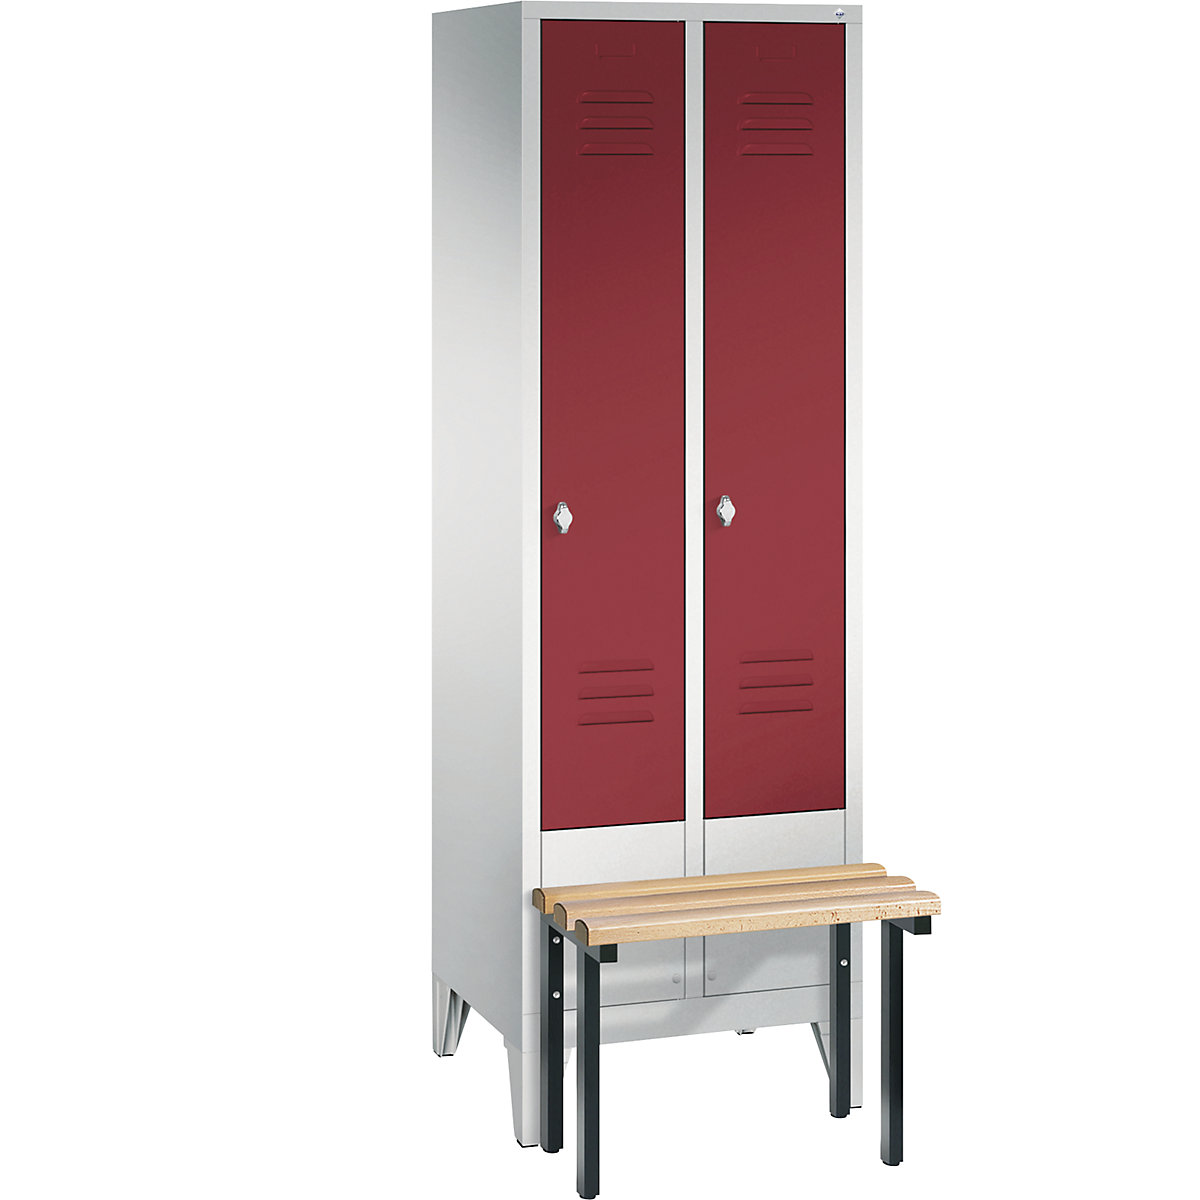 CLASSIC cloakroom locker with bench mounted in front – C+P, 2 compartments, compartment width 300 mm, light grey / ruby red-6